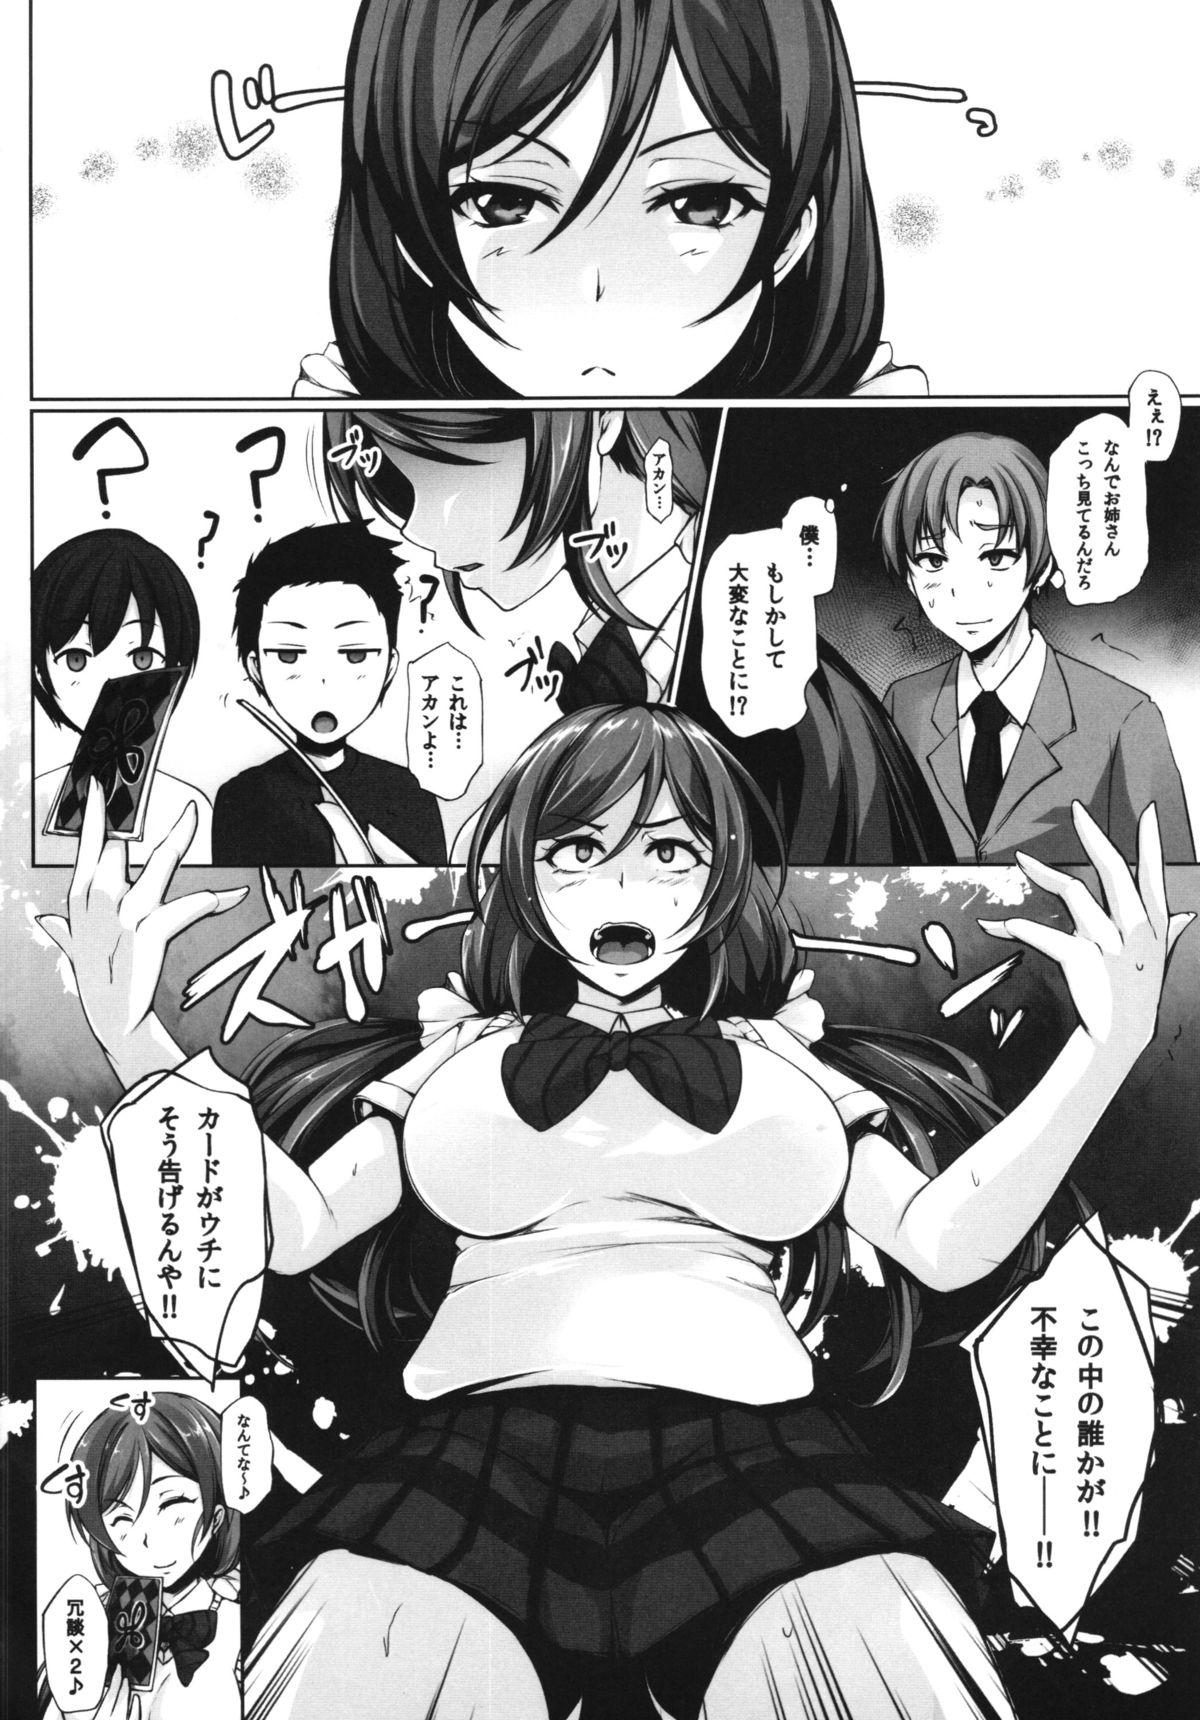 Cheating Wife LOVE-MIX! - Love live Gay Cut - Page 4